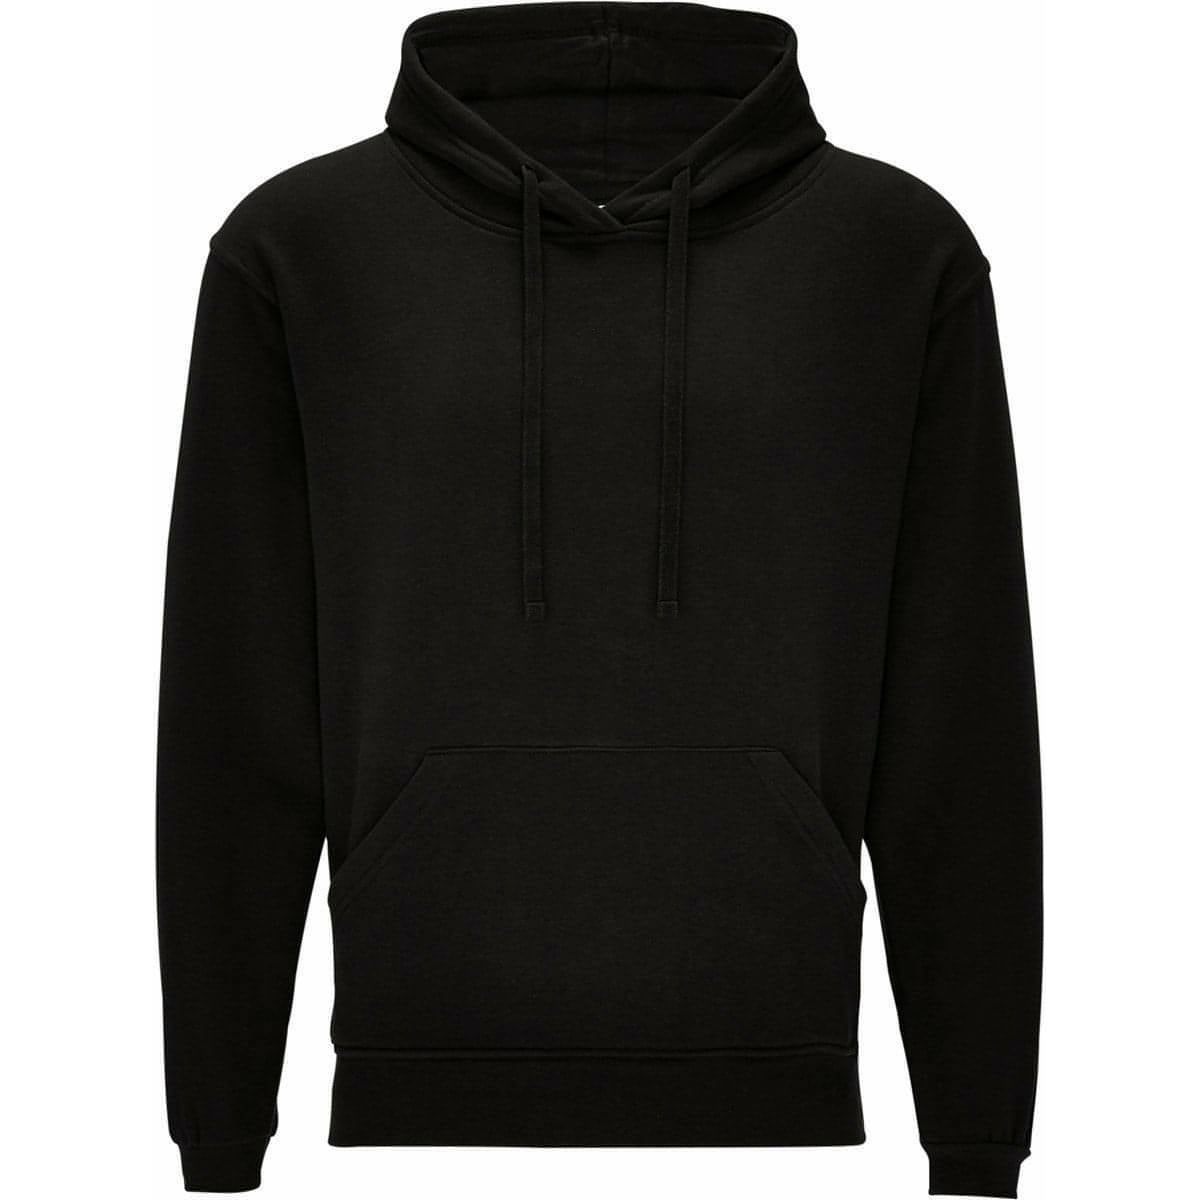 Blank Threads Hoody Black Front - Front View